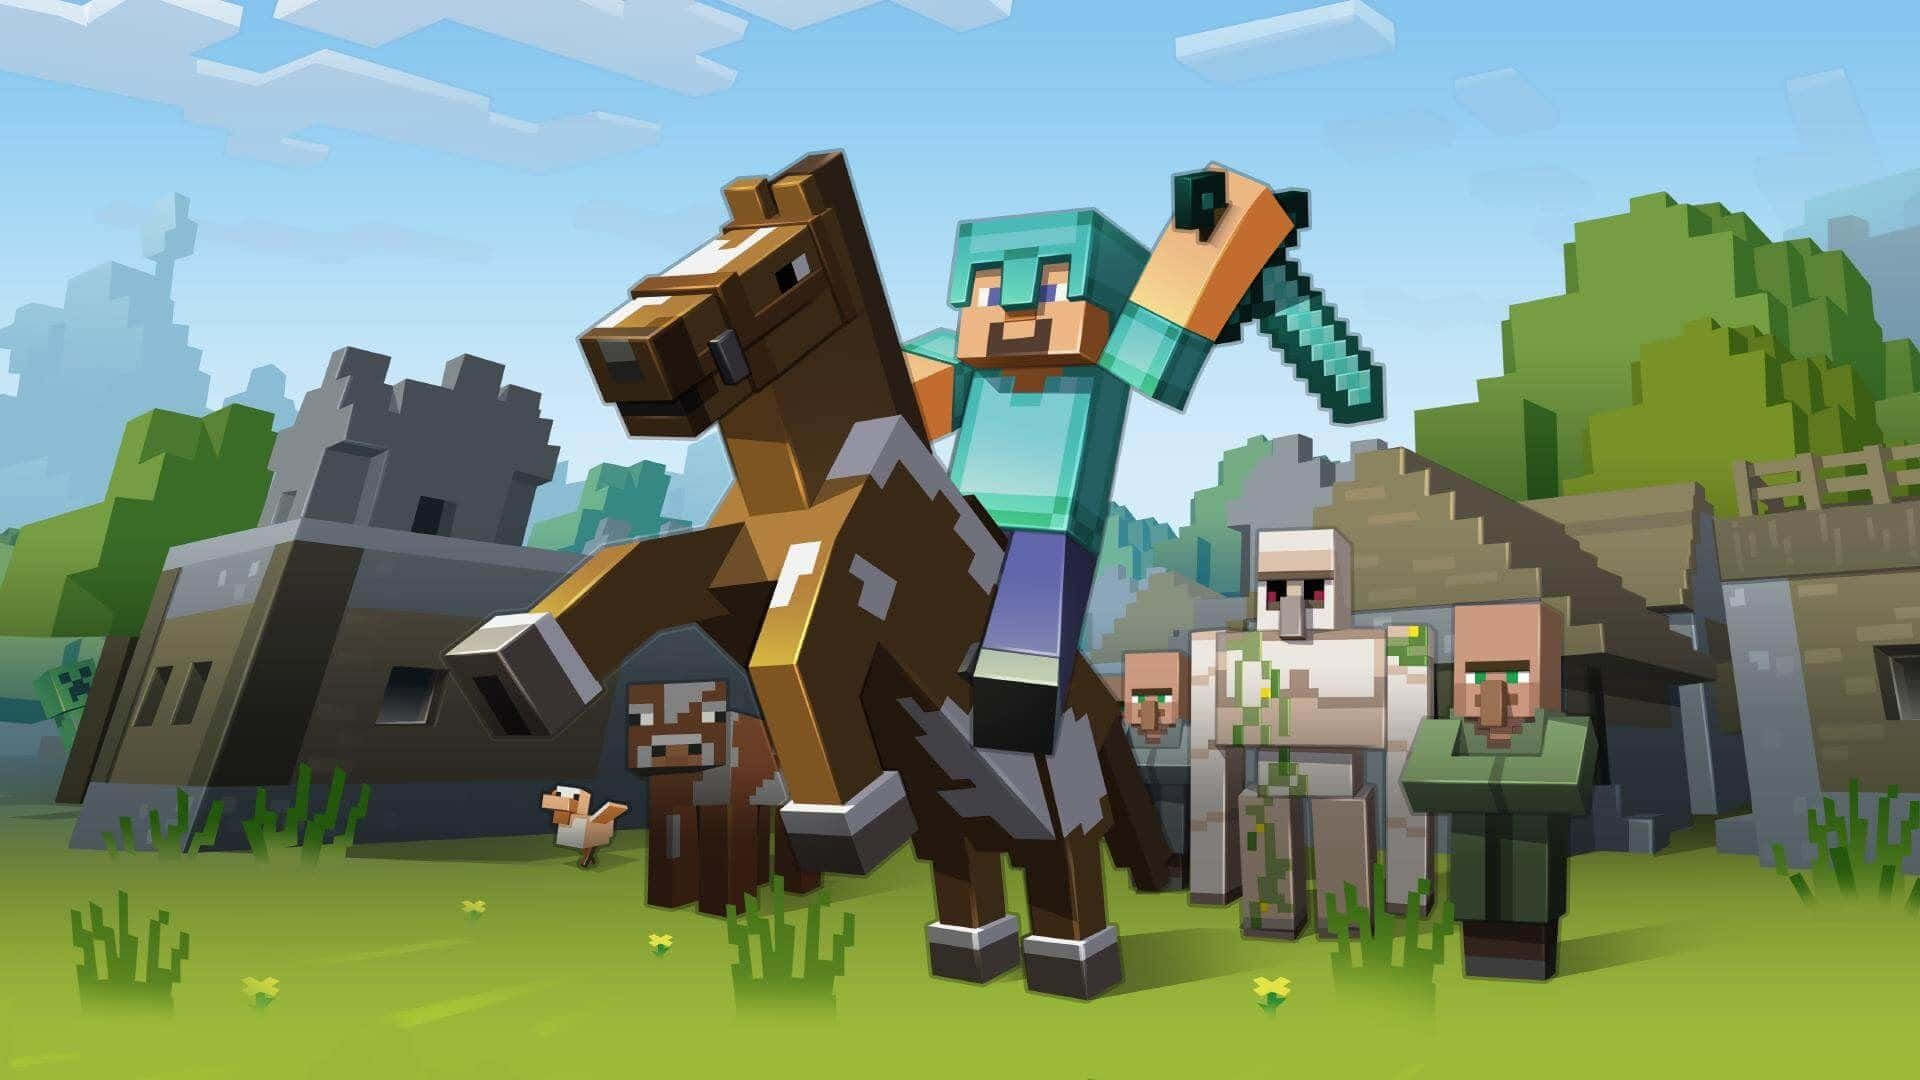 Minecraft Fight: Intense battle between two players in the blocky world of Minecraft Wallpaper